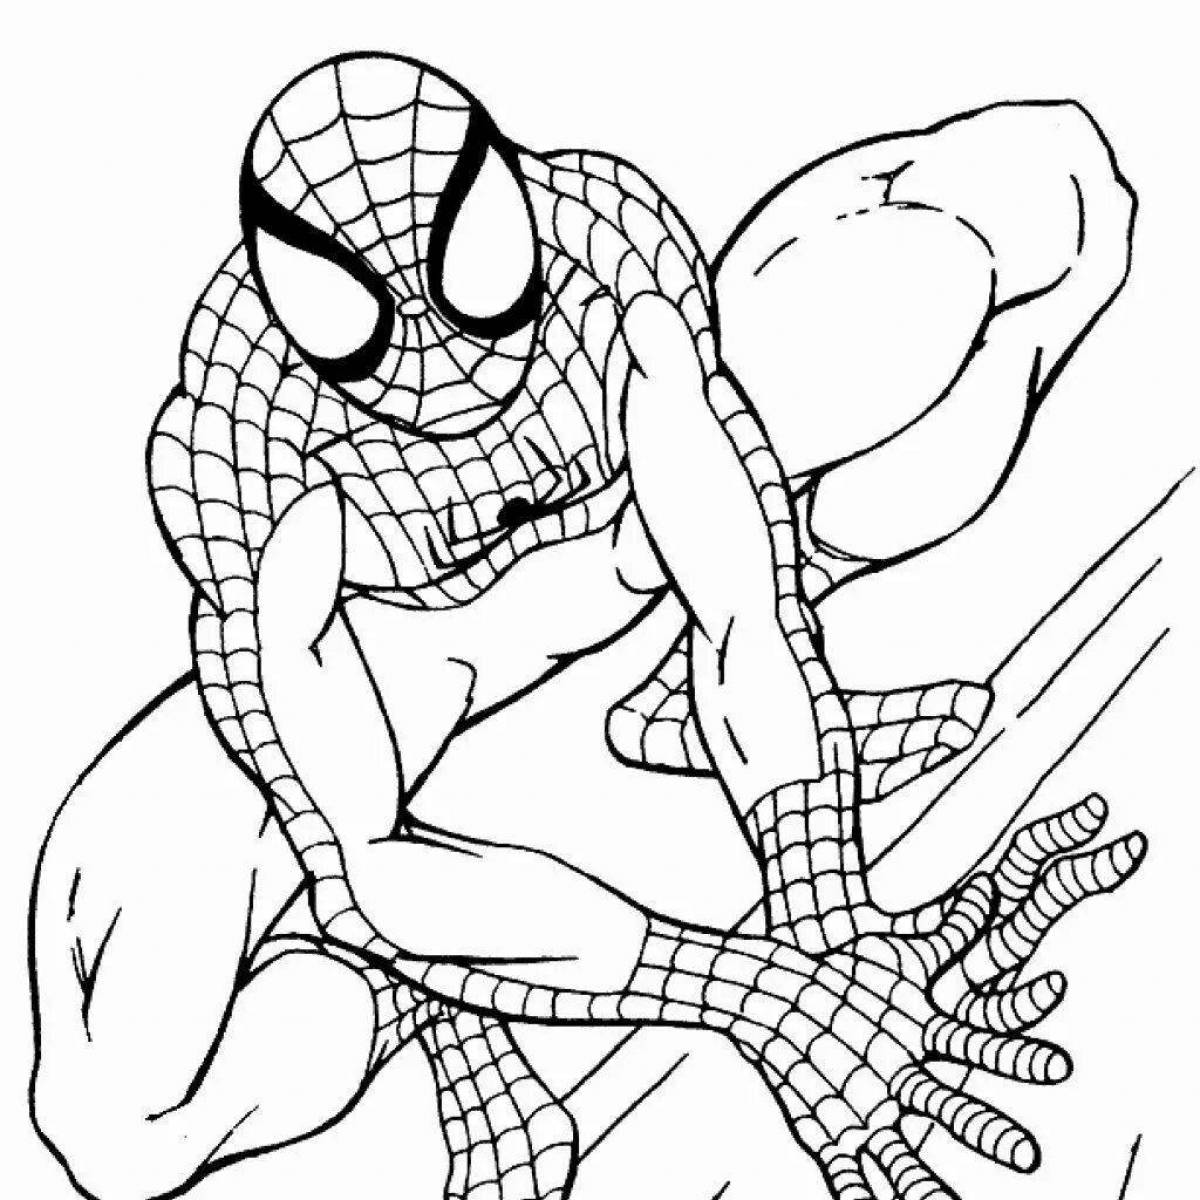 Colorful spiderman coloring pages for kids